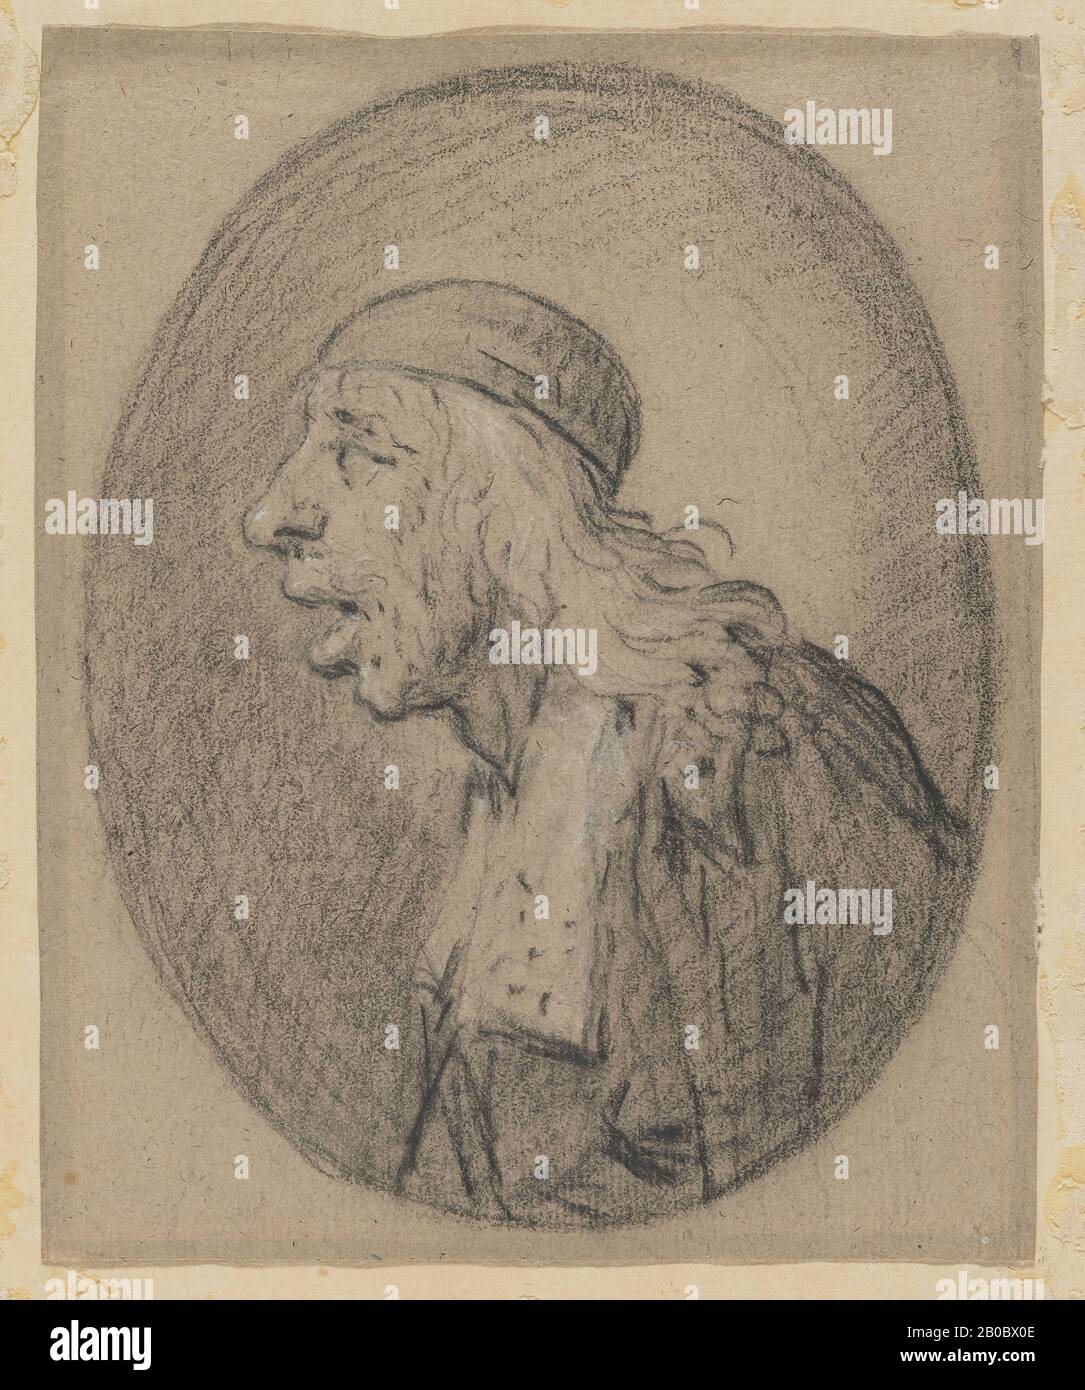 Unknown Artist, Portrait Caricature of a Man, 1600-1700, black and white chalk on brown paper, 6 7/16 in. x 5 1/4 in. (16.4 cm. x 13.4 cm.) Stock Photo